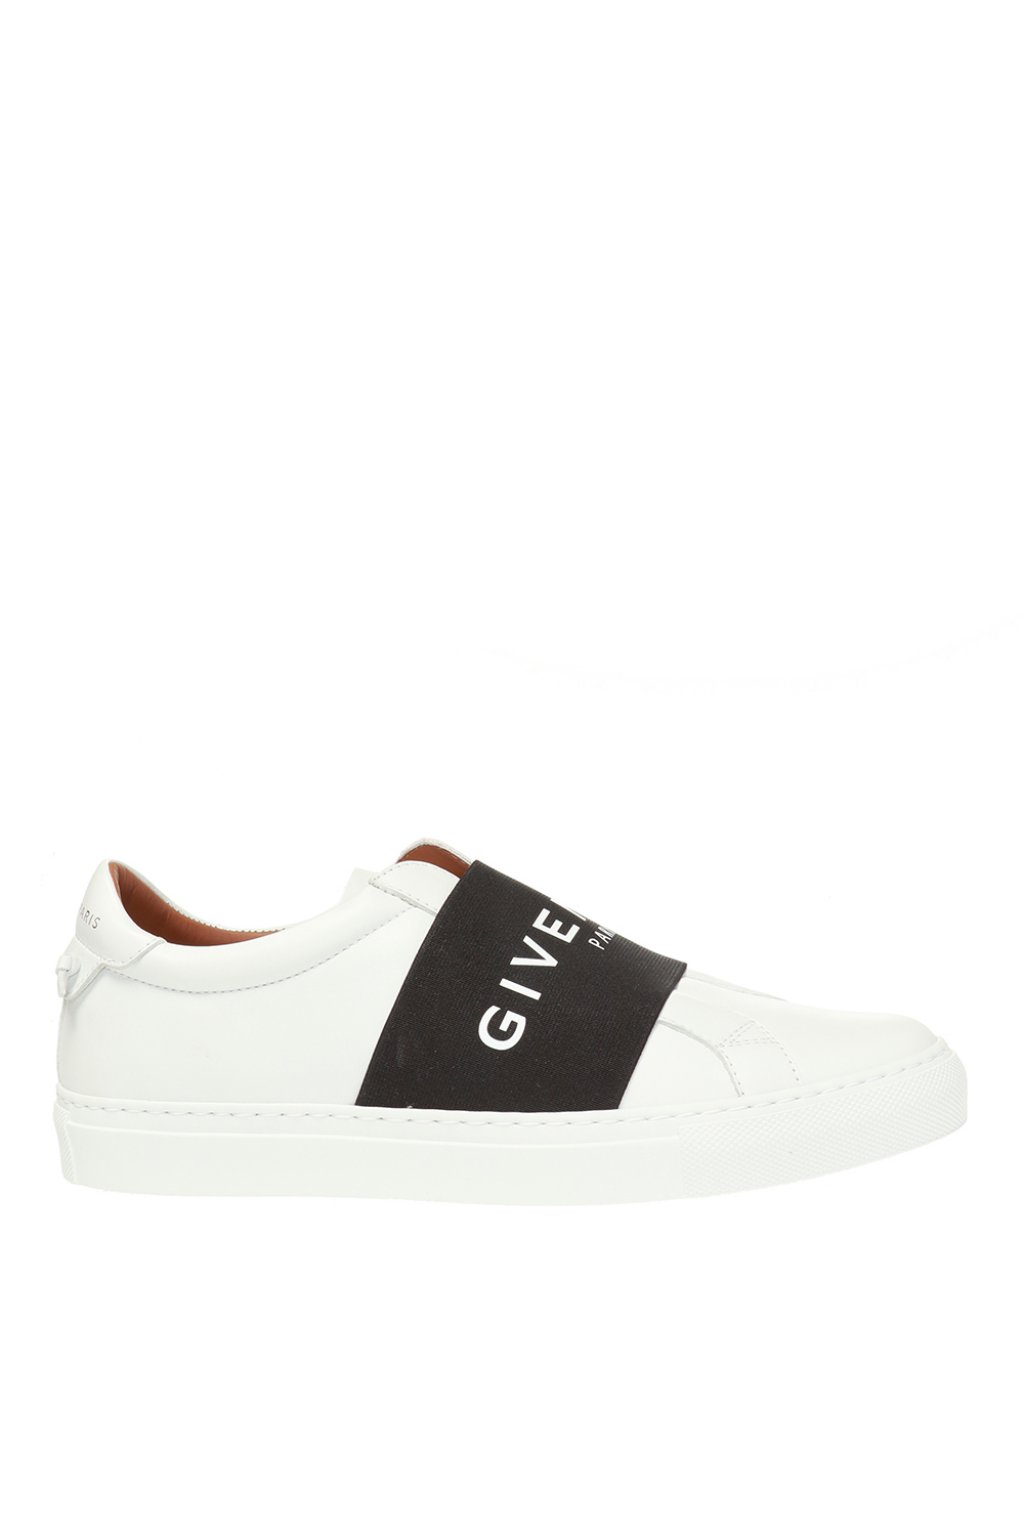 Givenchy Leather sneakers